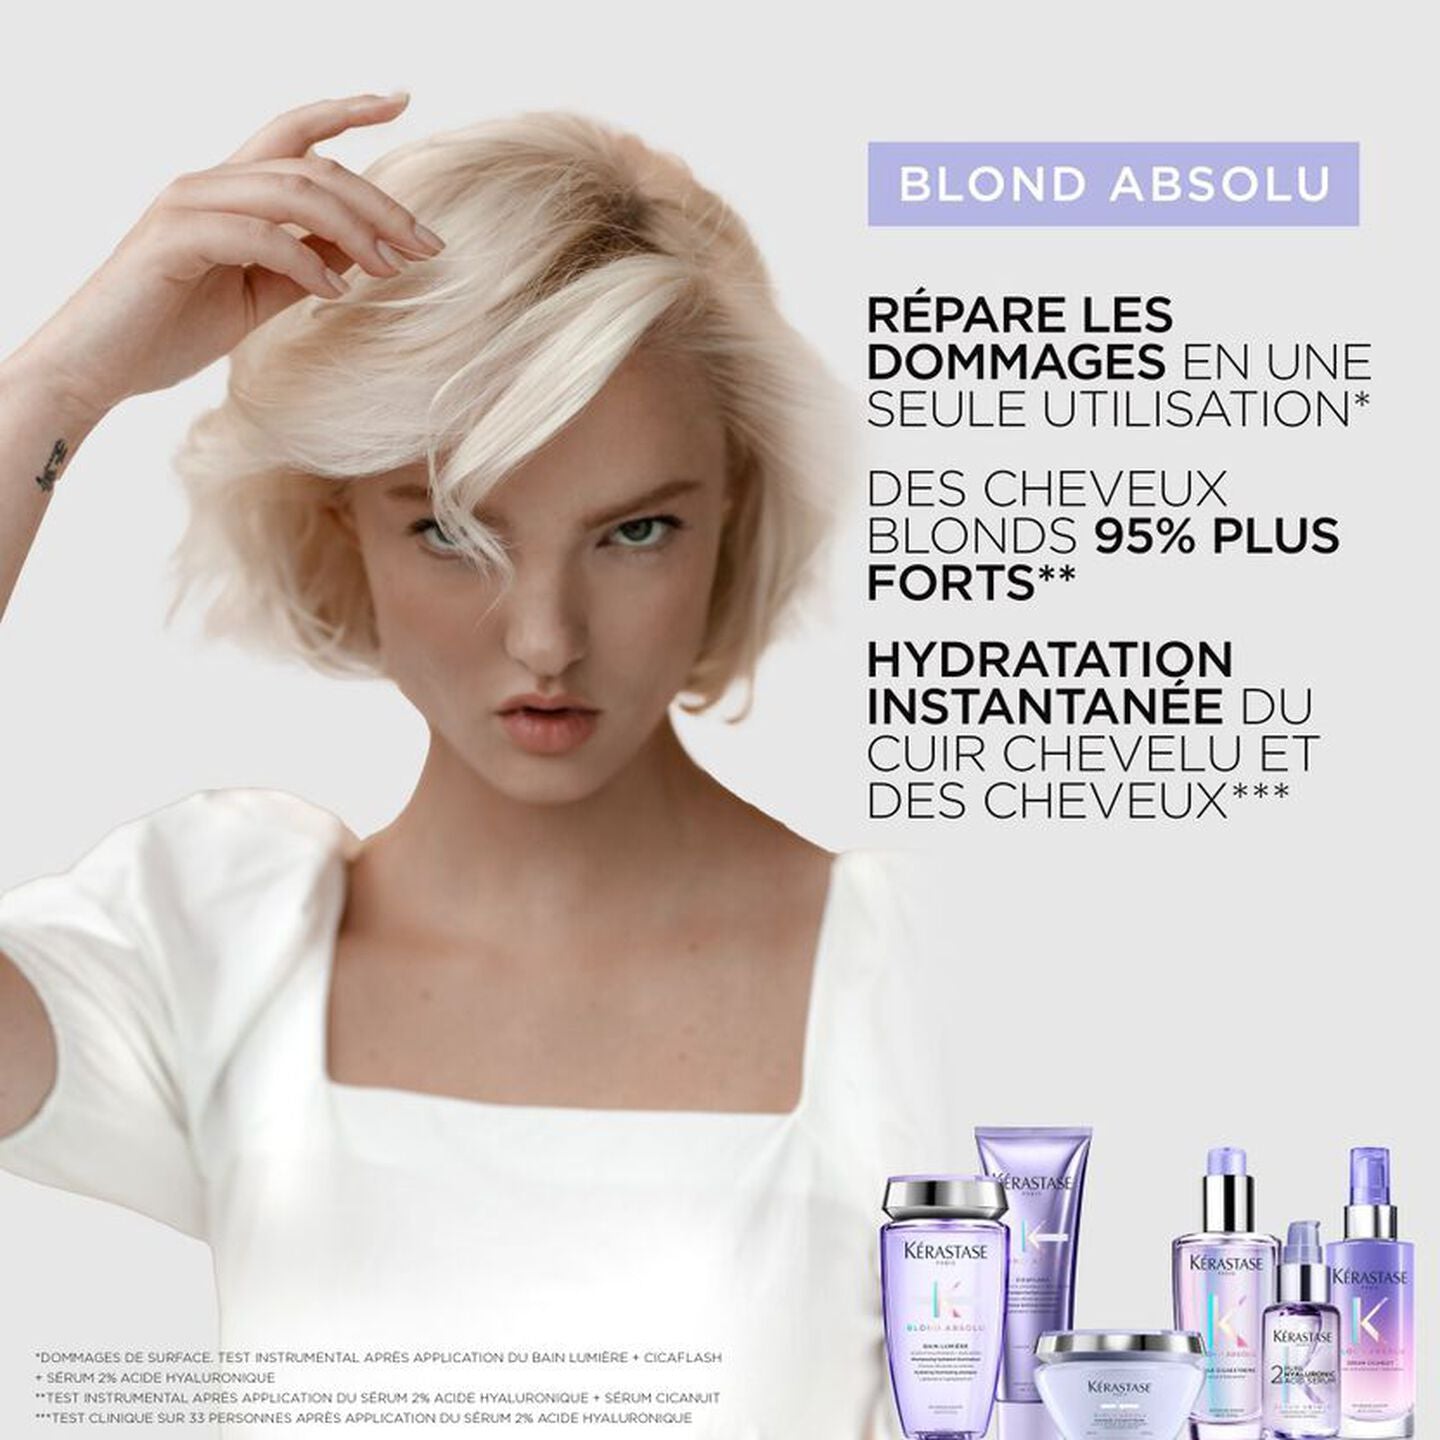 Spring duo - Ultra-Violet Absolute Blond